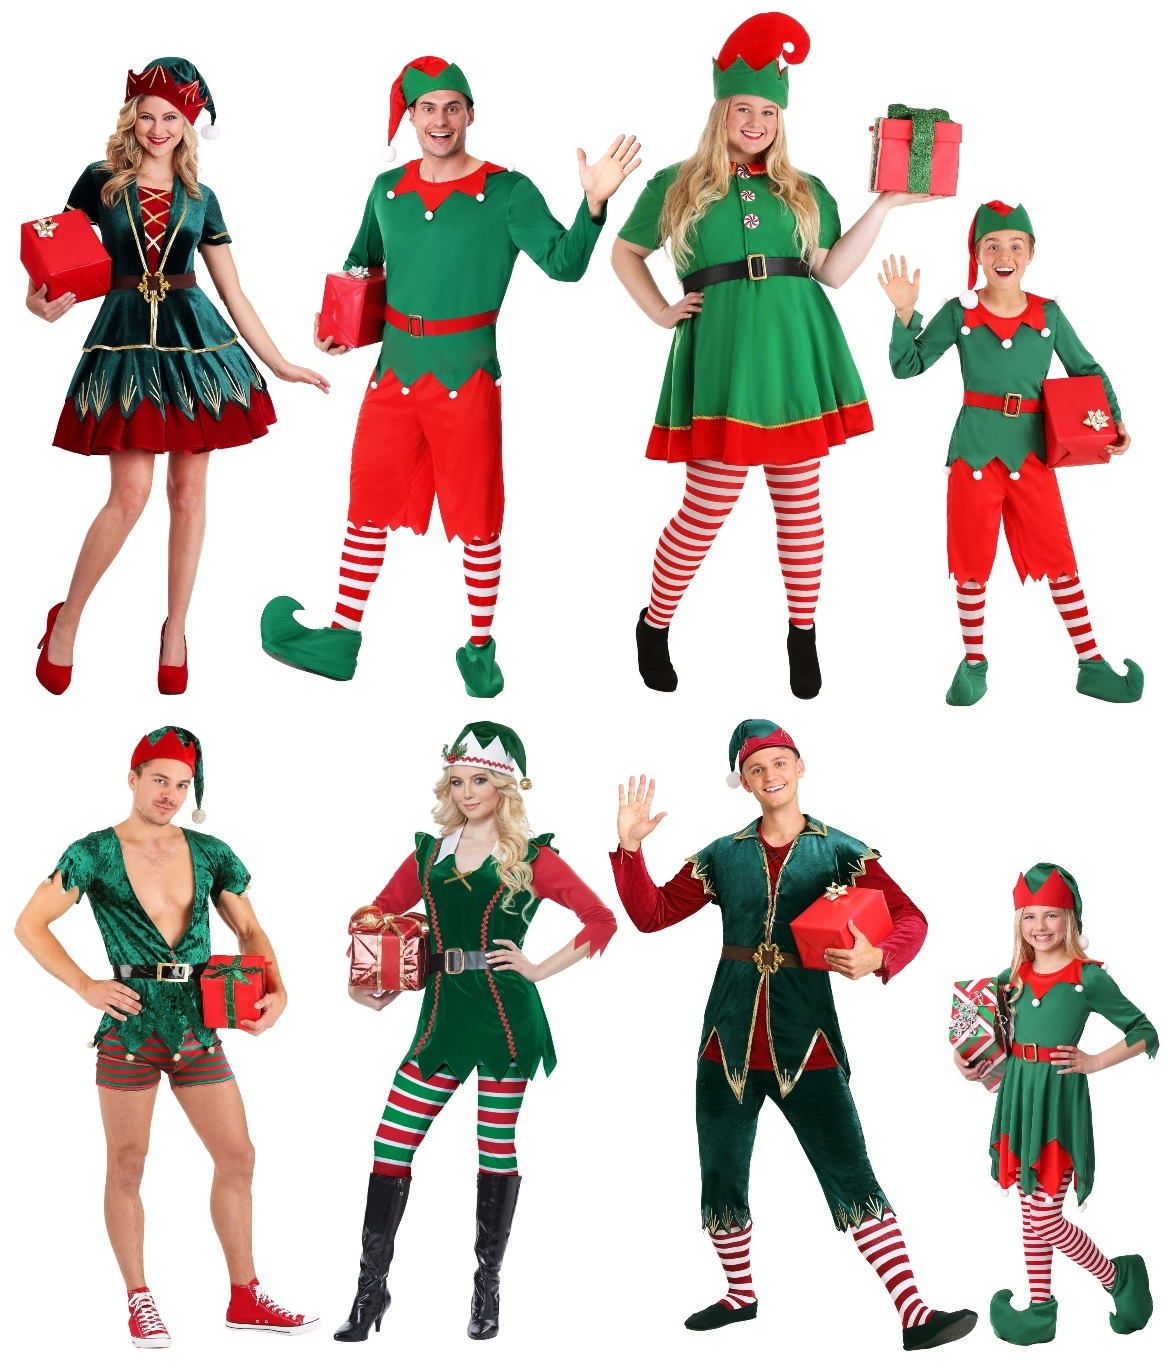 Elf Costumes for Christmas in July